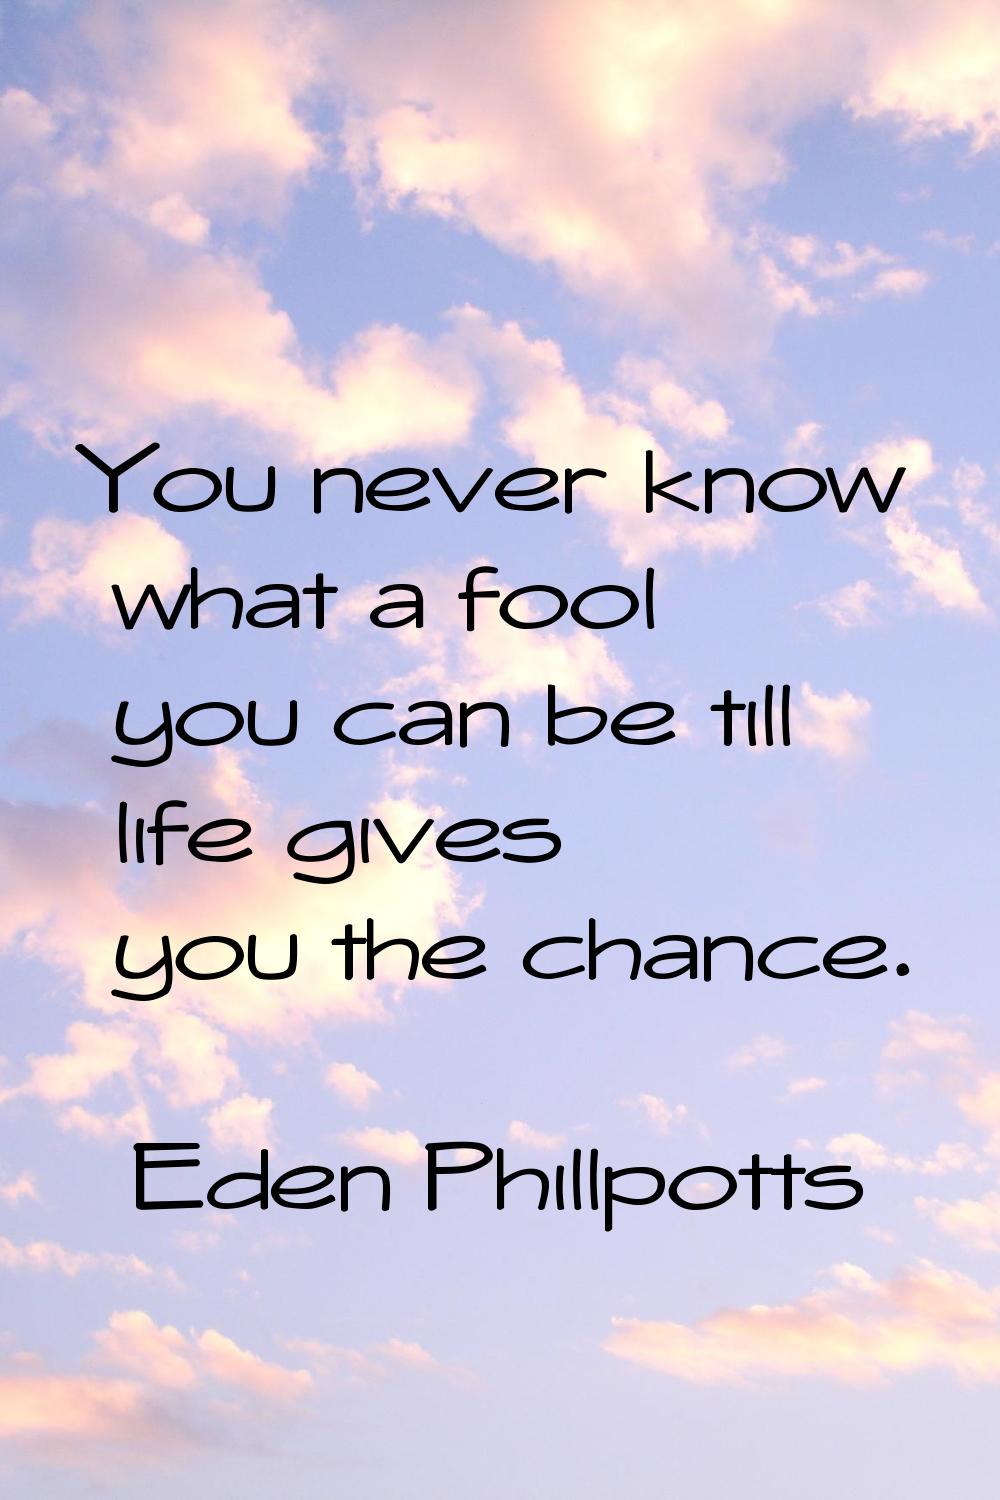 You never know what a fool you can be till life gives you the chance.